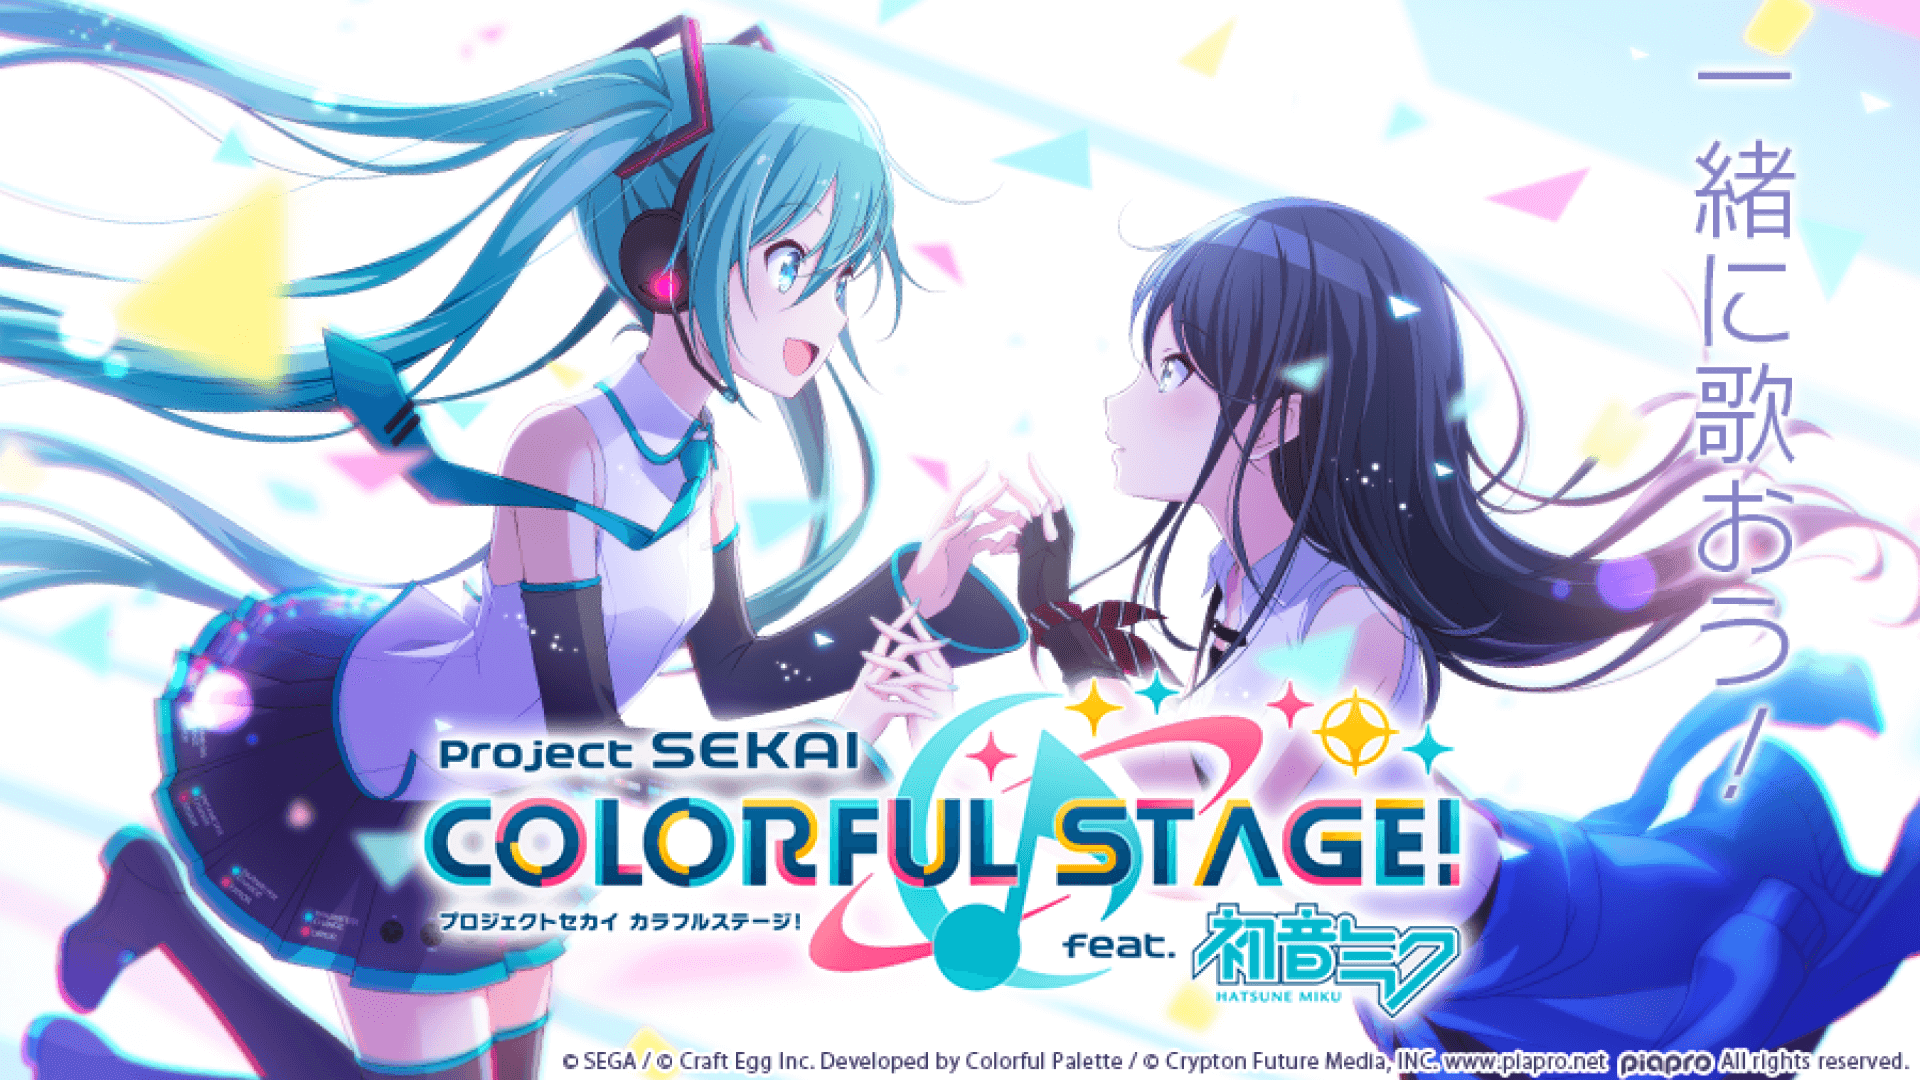 Project Sekai: Colorful Stage! feat. Hatsune Miku feature image